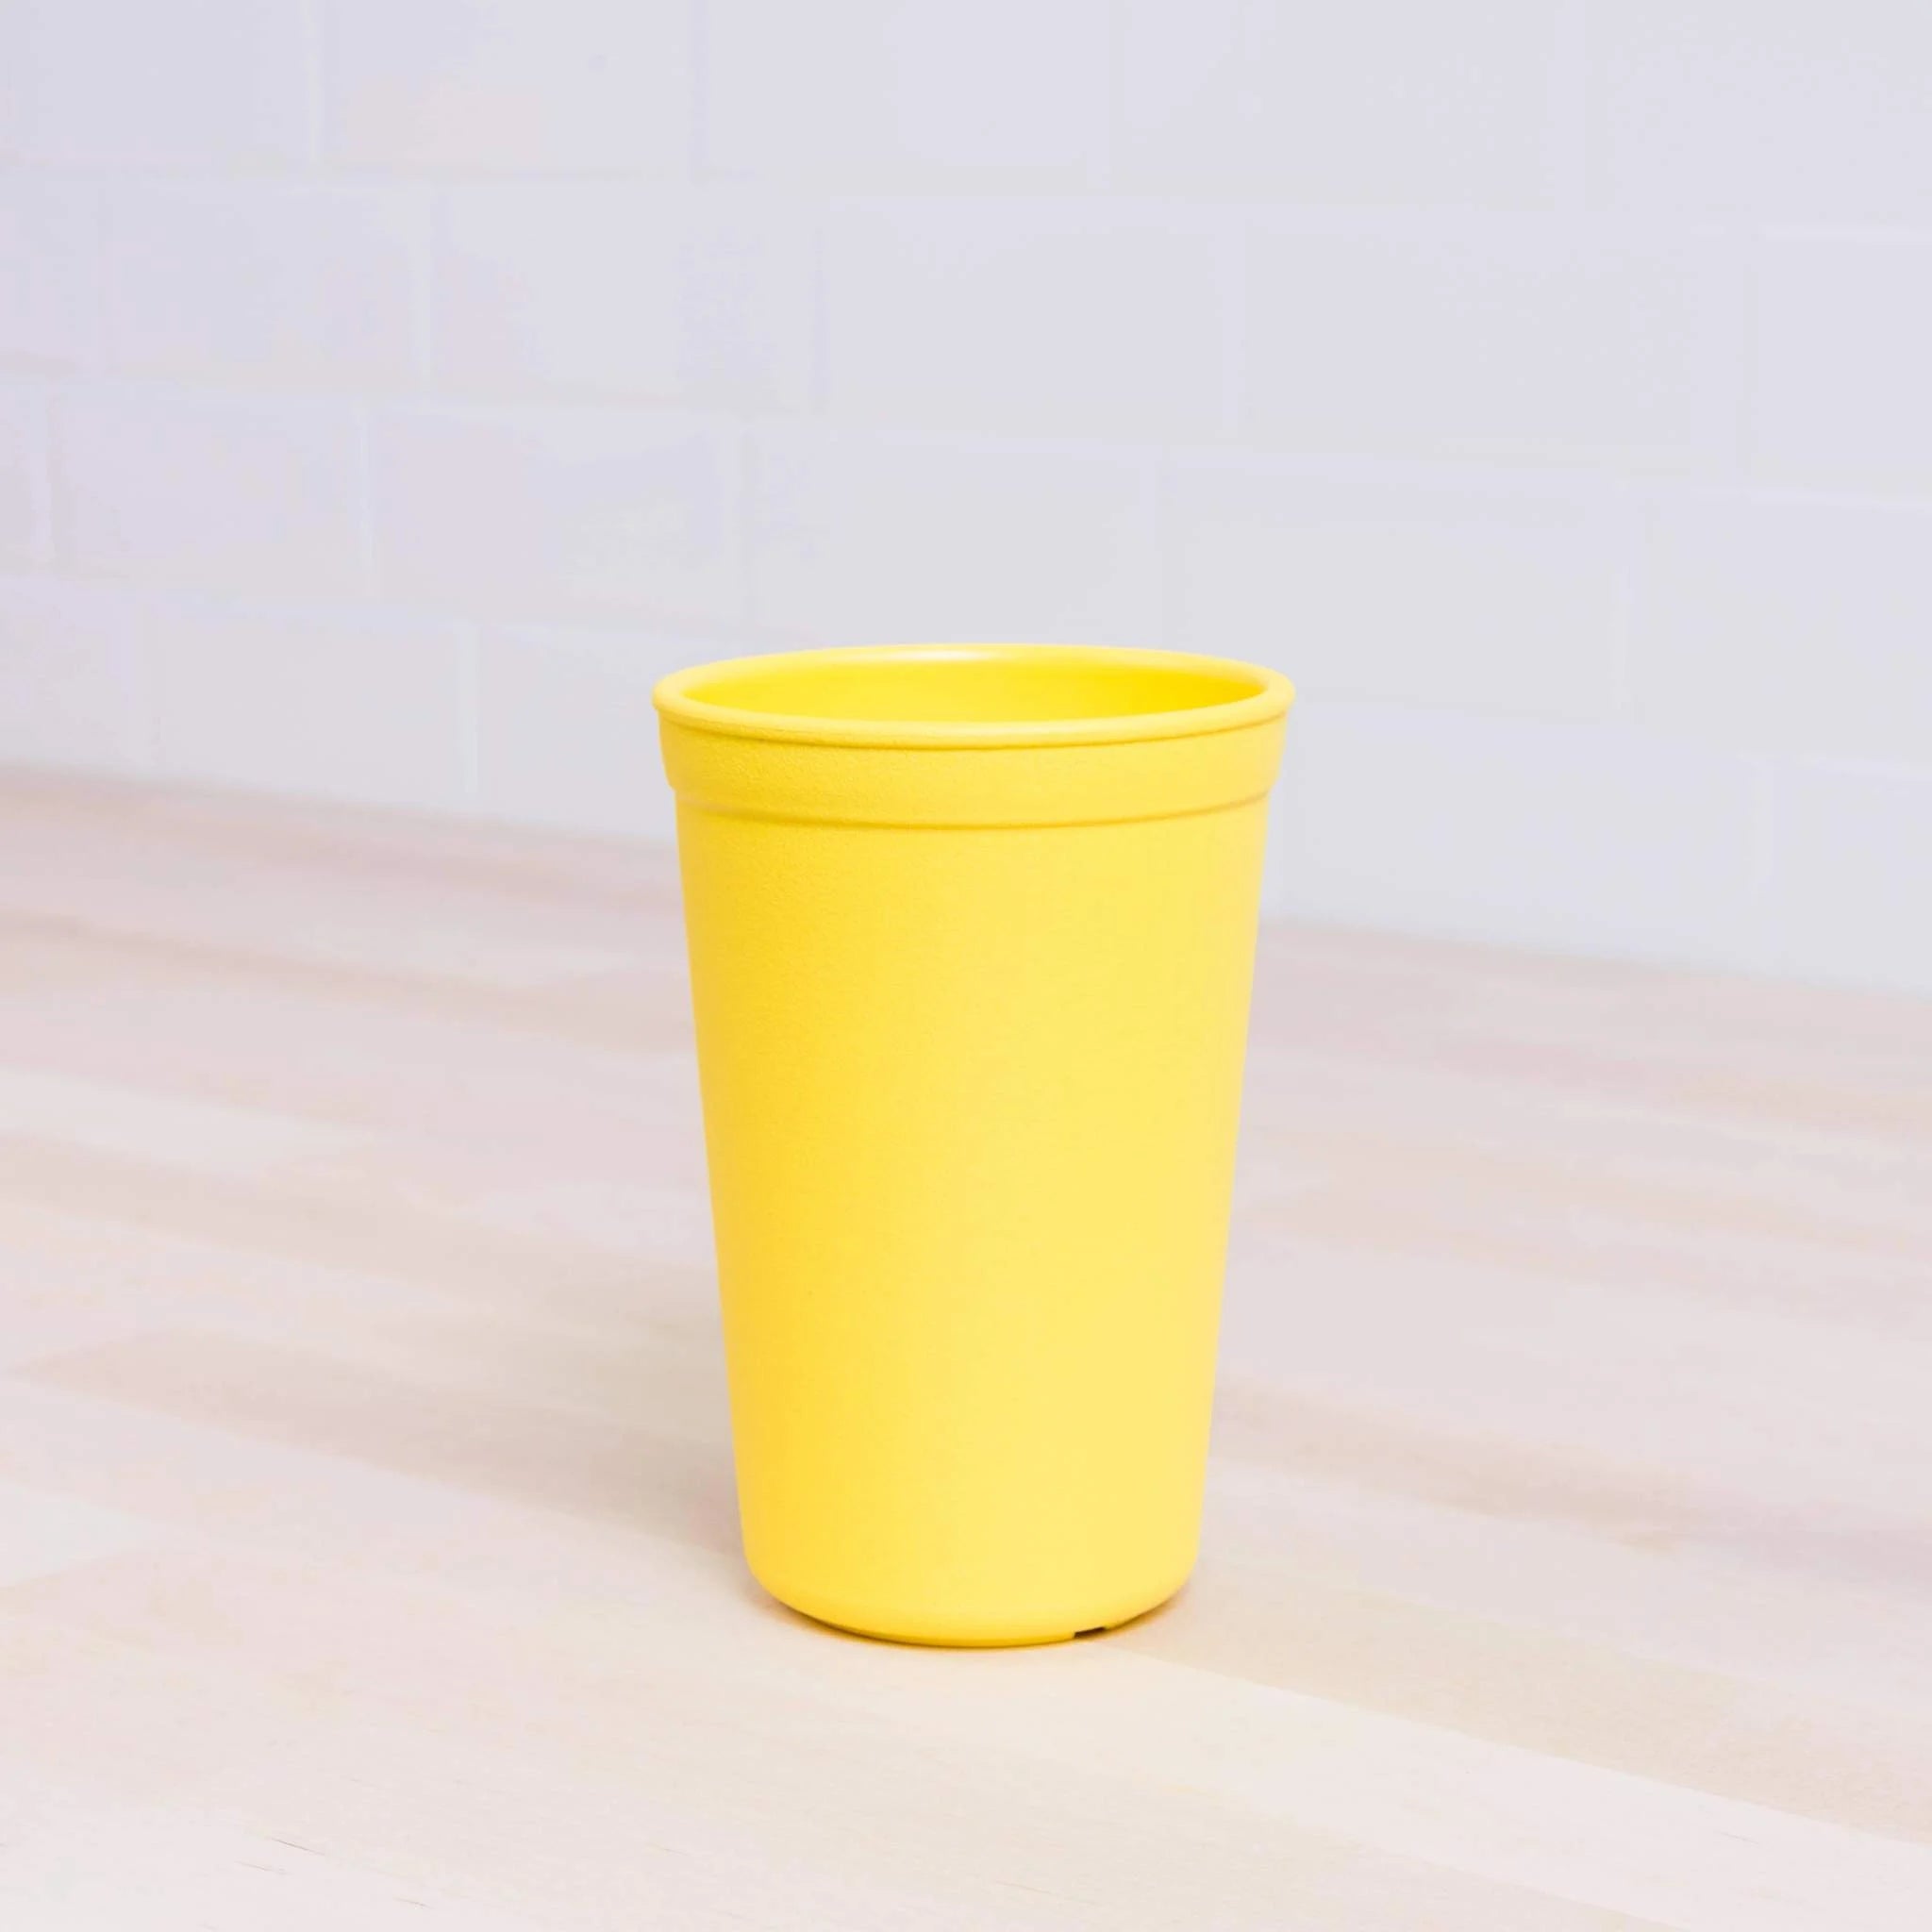 Re-Play - Packaged Drinking Cups - Easter - Pack of 3